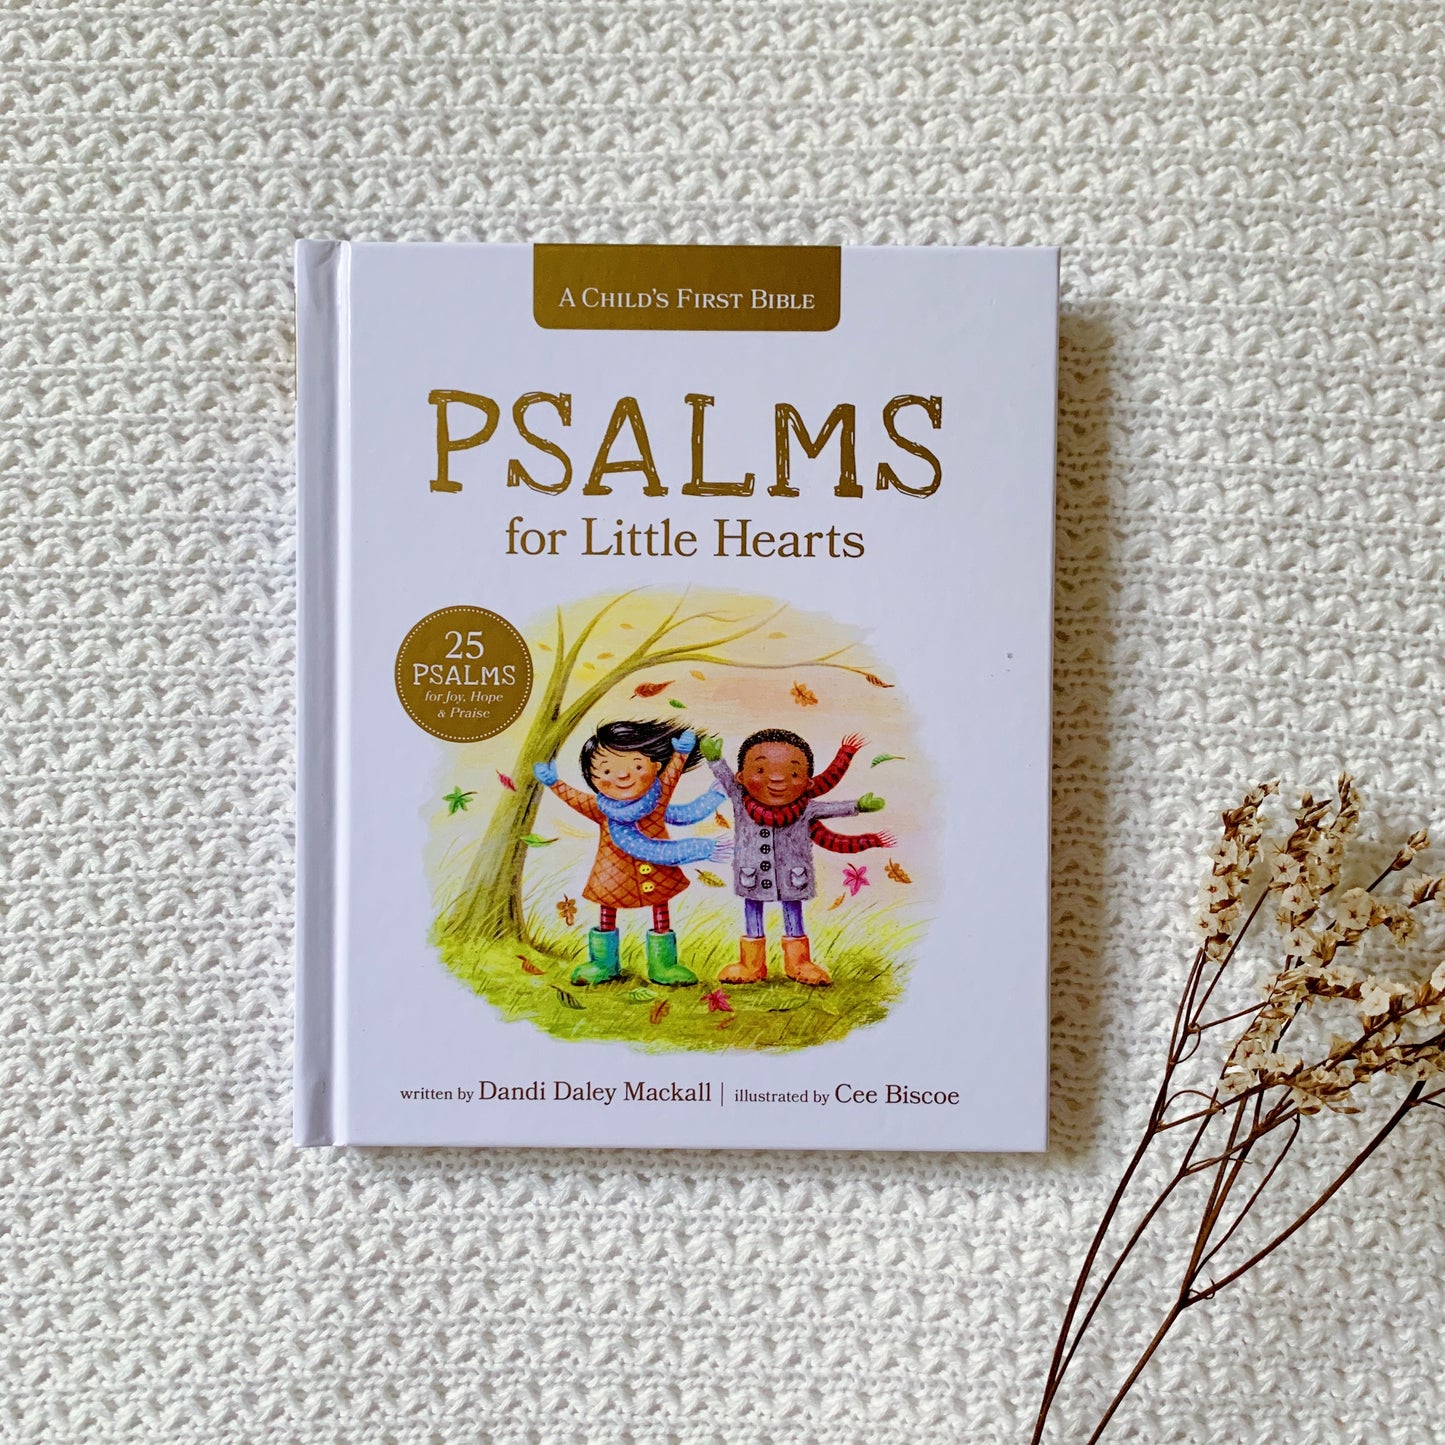 Psalms for Little Hearts